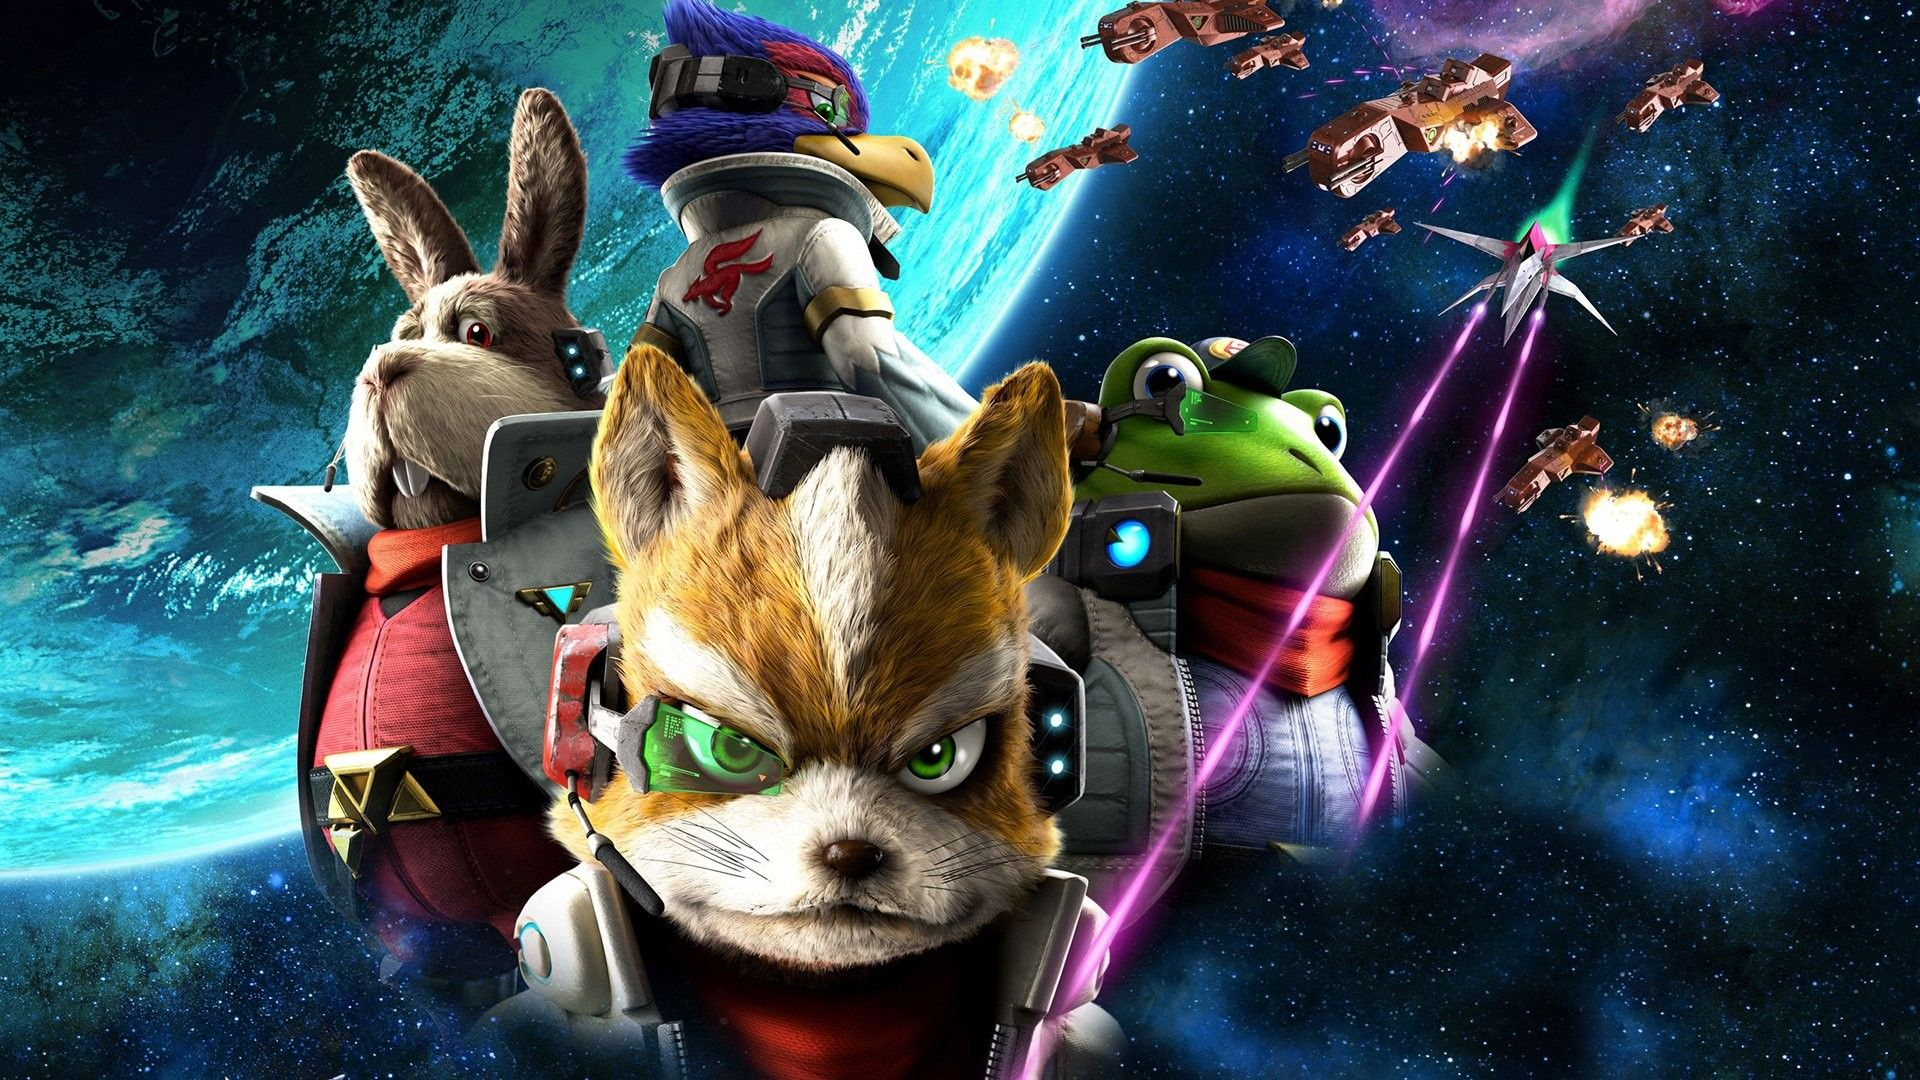 1920x1080 Star Fox Wallpapers Top Free Star Fox Backgrounds